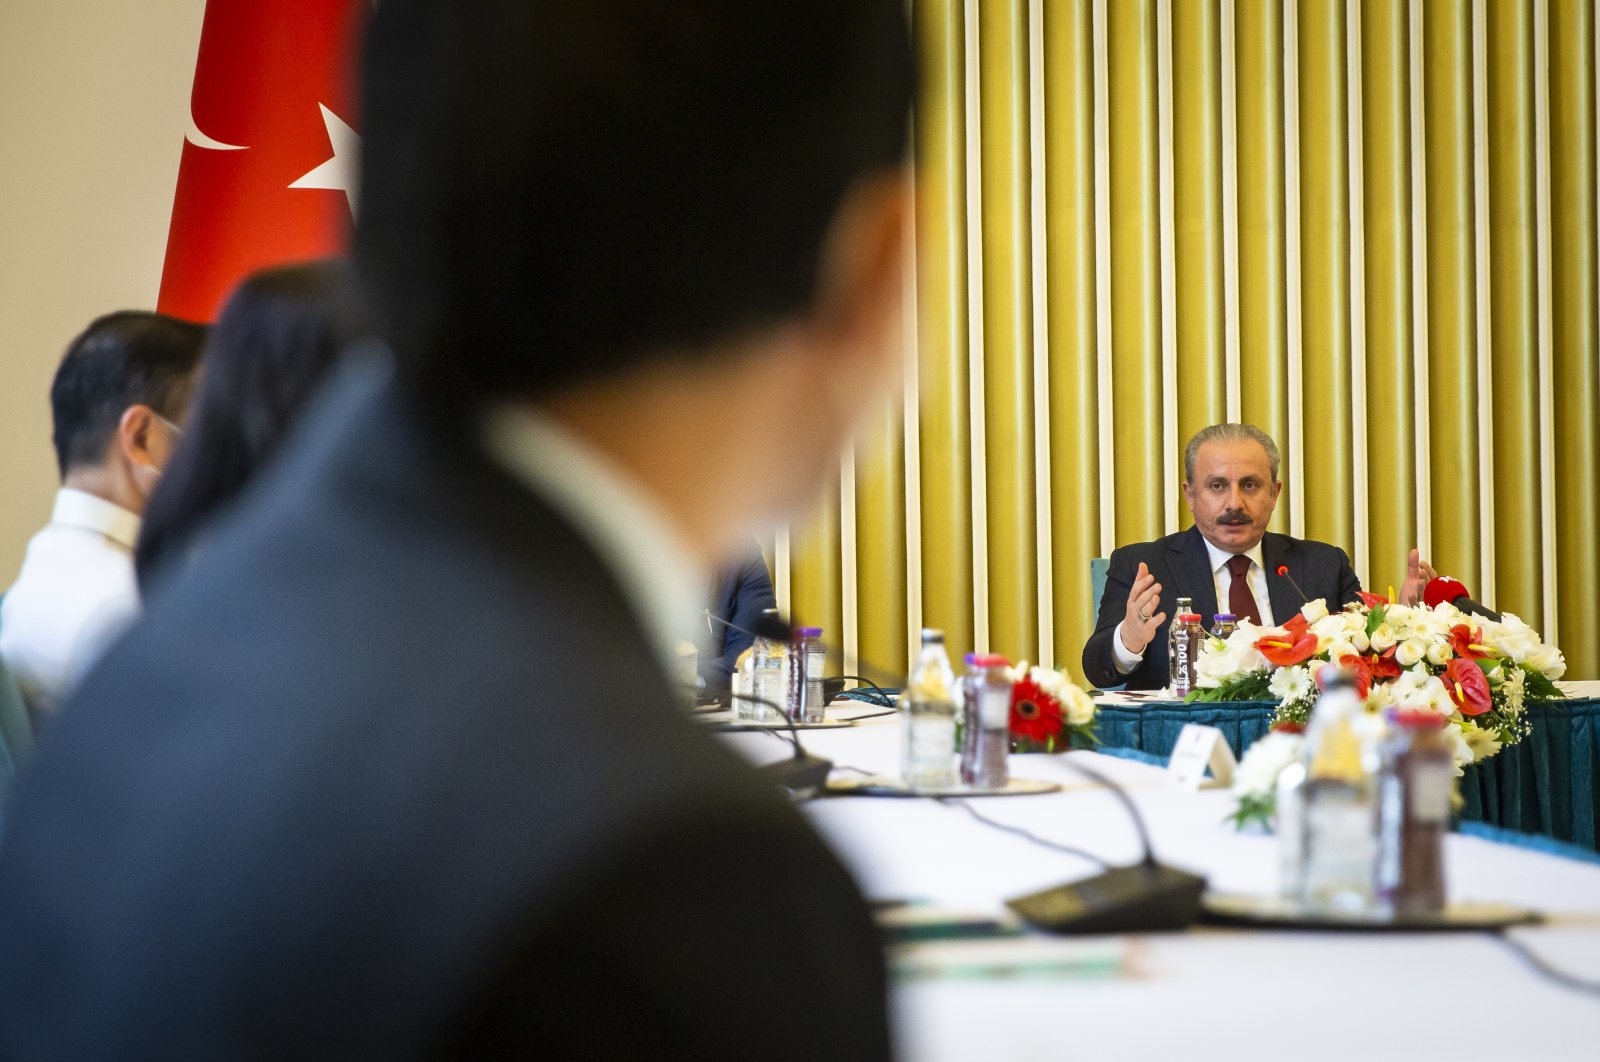 Parliament speaker, Mustafa Şentop, meets with envoys from member states of the Association of Southeast Asian Nations (ASEAN), in Ankara, June 29, 2020. (AA)